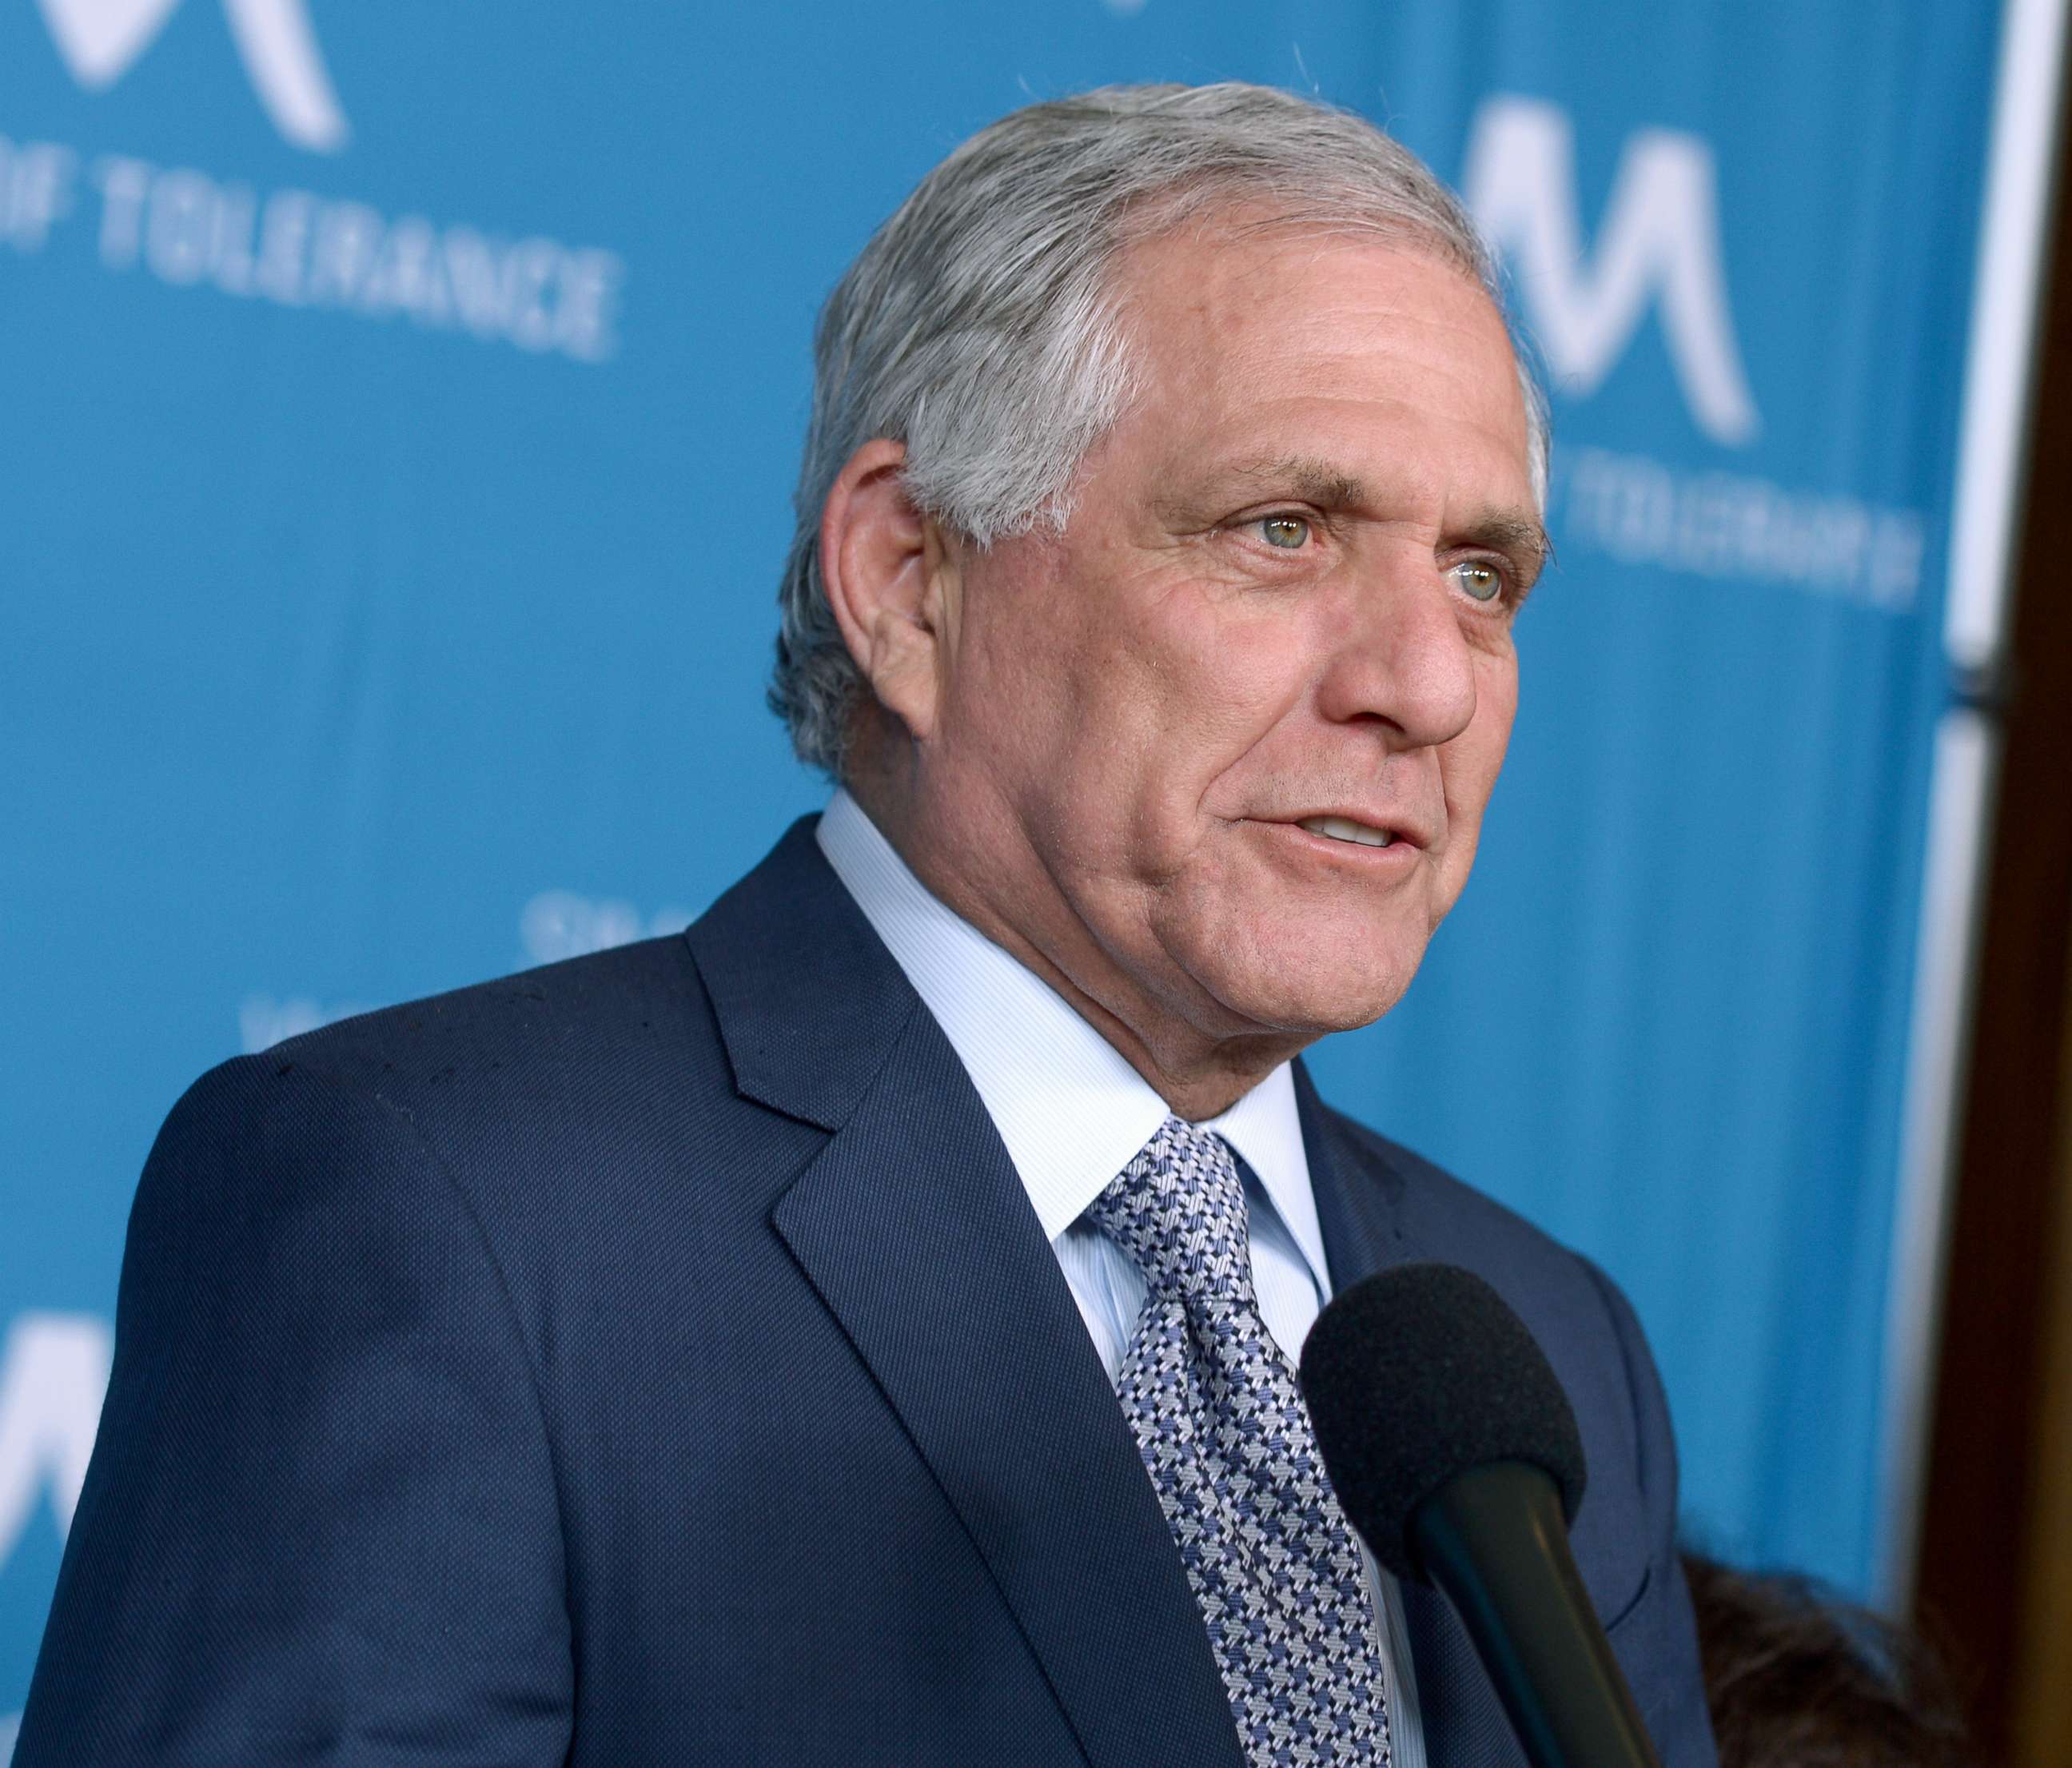 PHOTO: Les Moonves attends an even in his honor, March 22, 2018 in Beverly Hills, Calif.